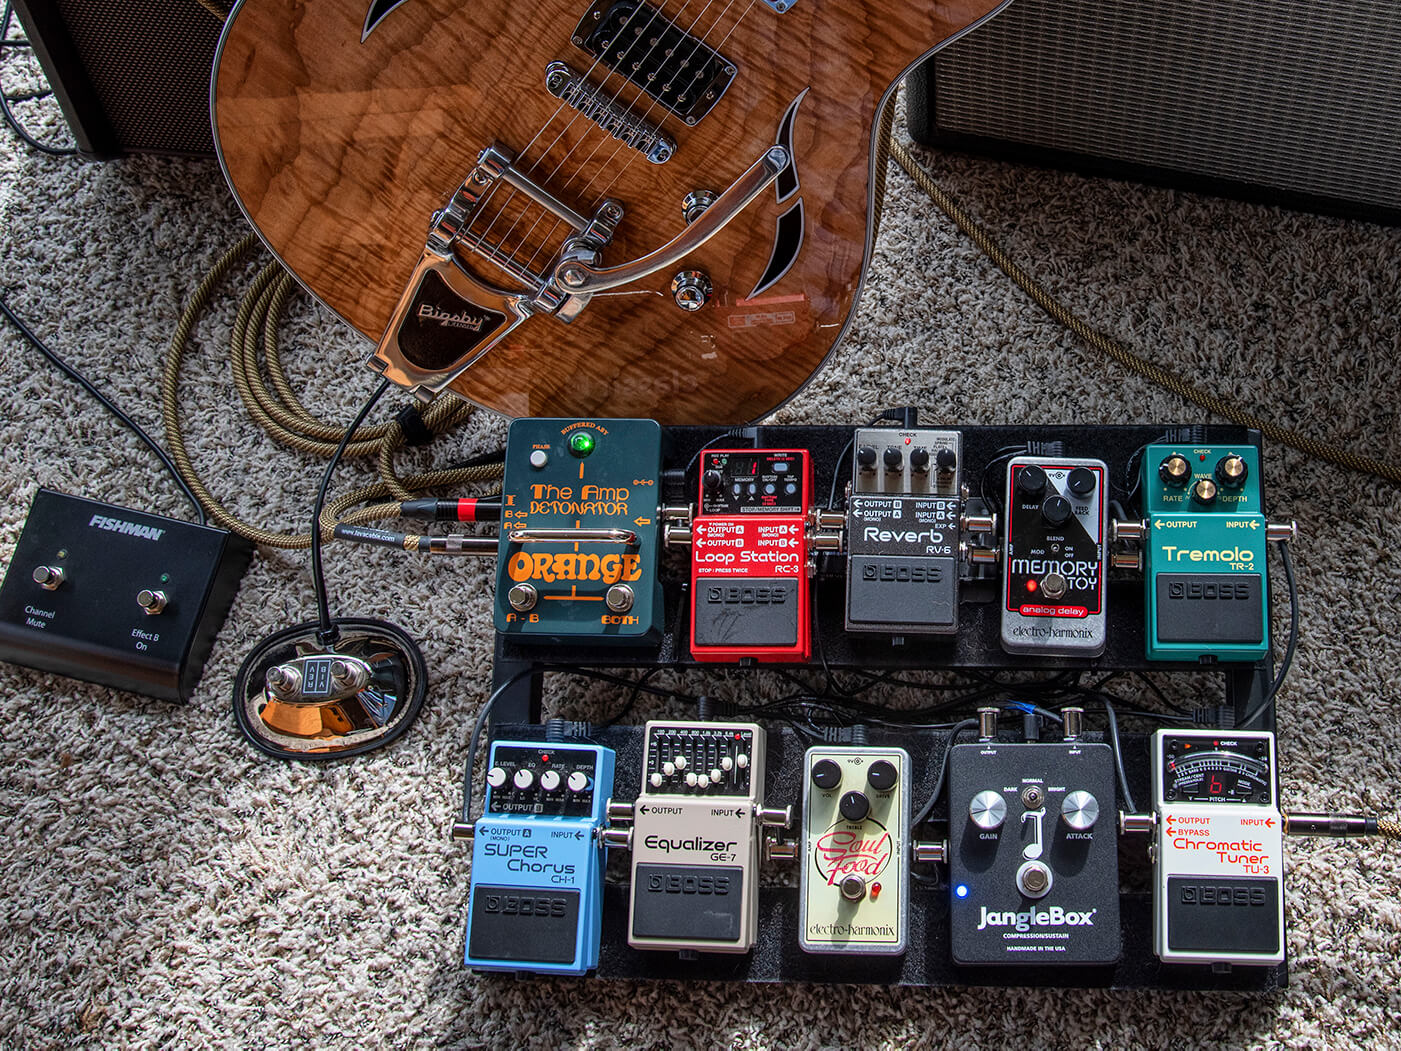 Mitchell Strauss pedalboard style shot against taylor guitar